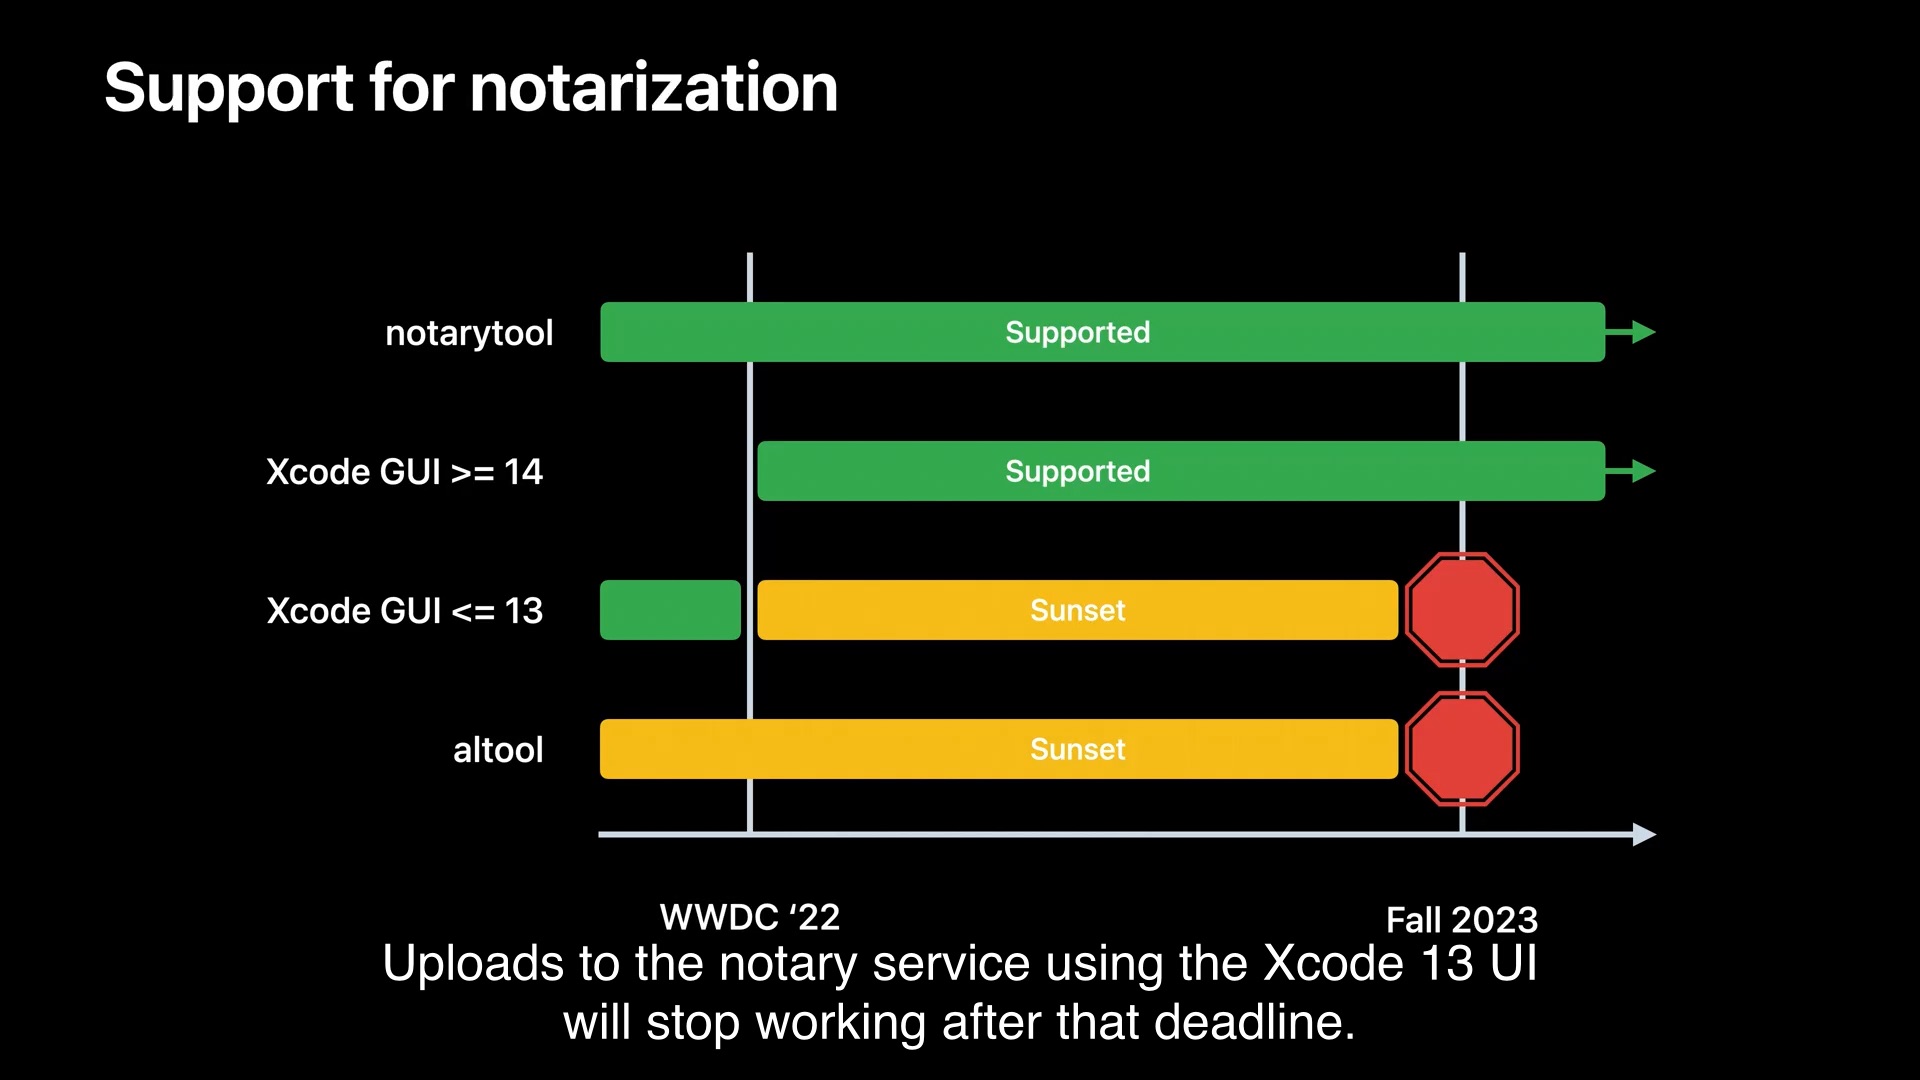 Uploads to the notary service using the Xcode 13 UI  will stop working after that deadline.